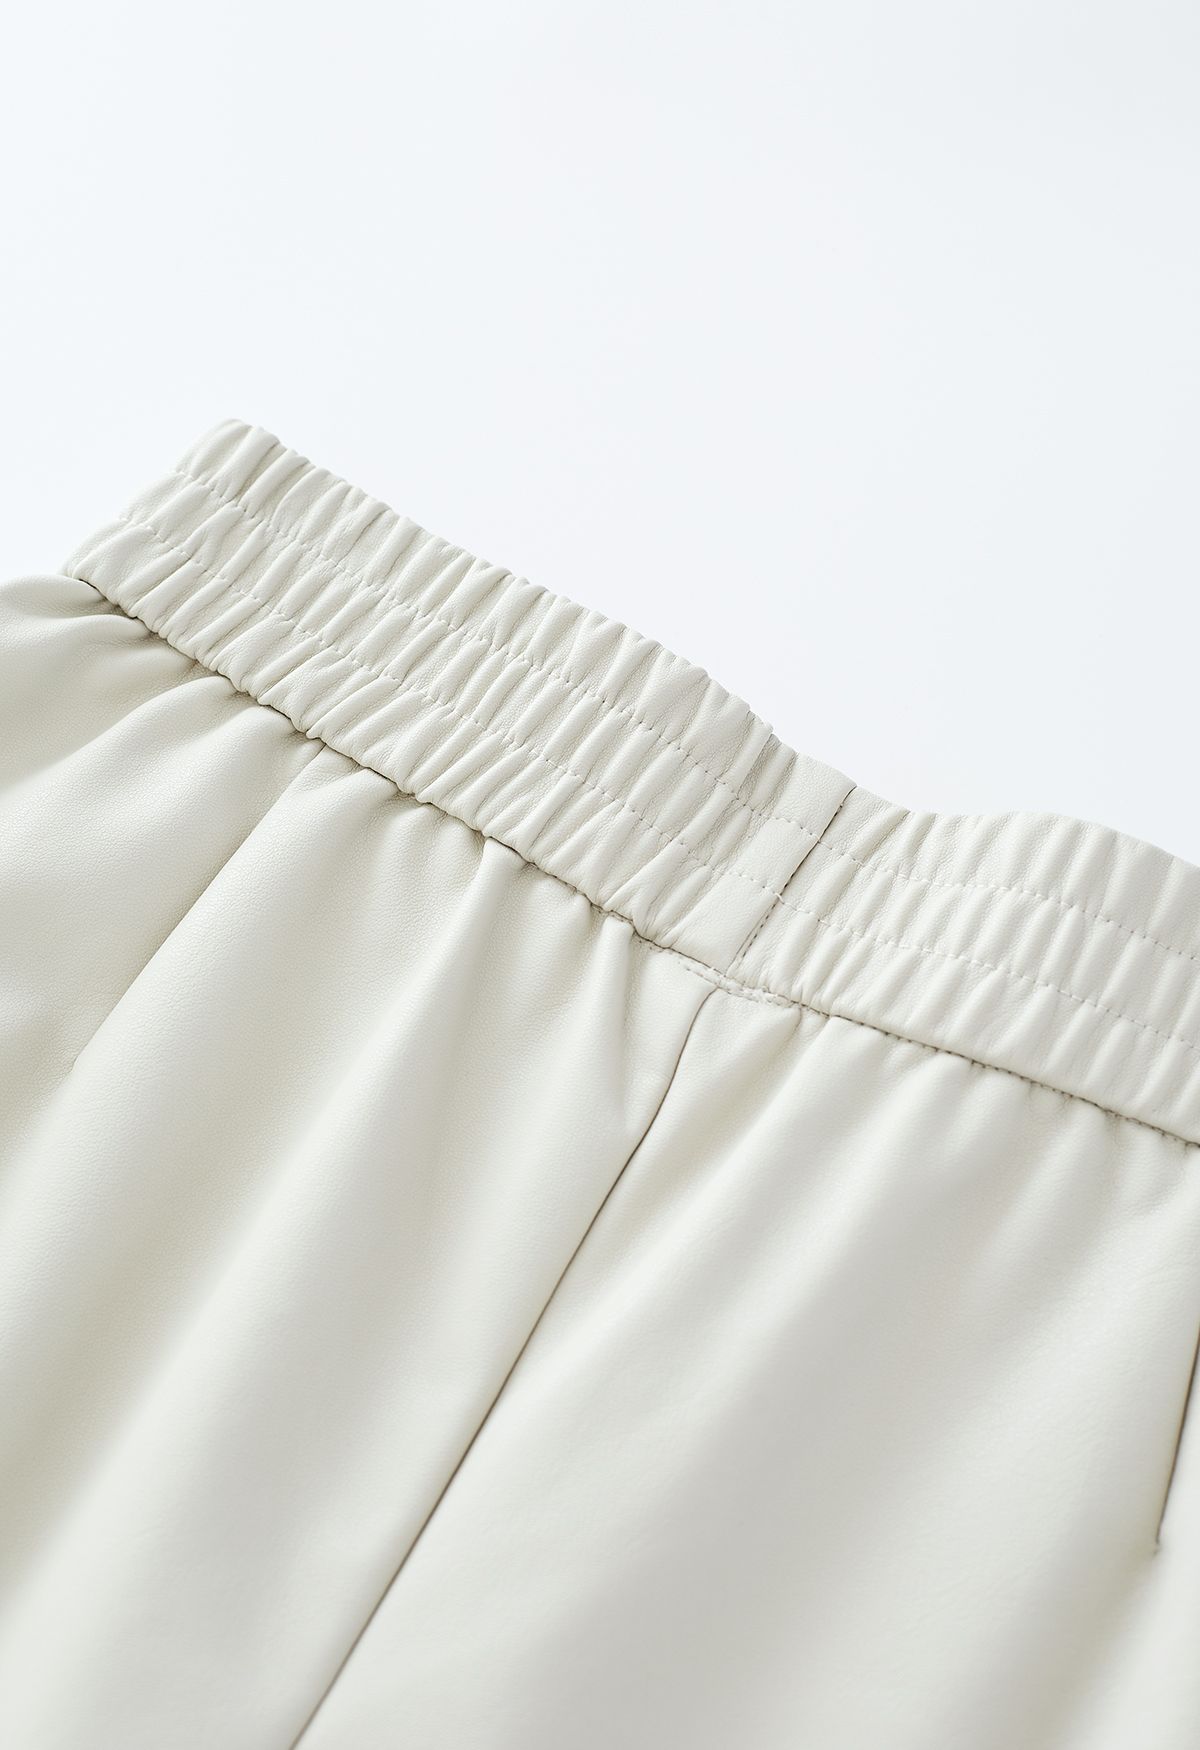 Textured Buttoned Faux Leather Shorts in Ivory